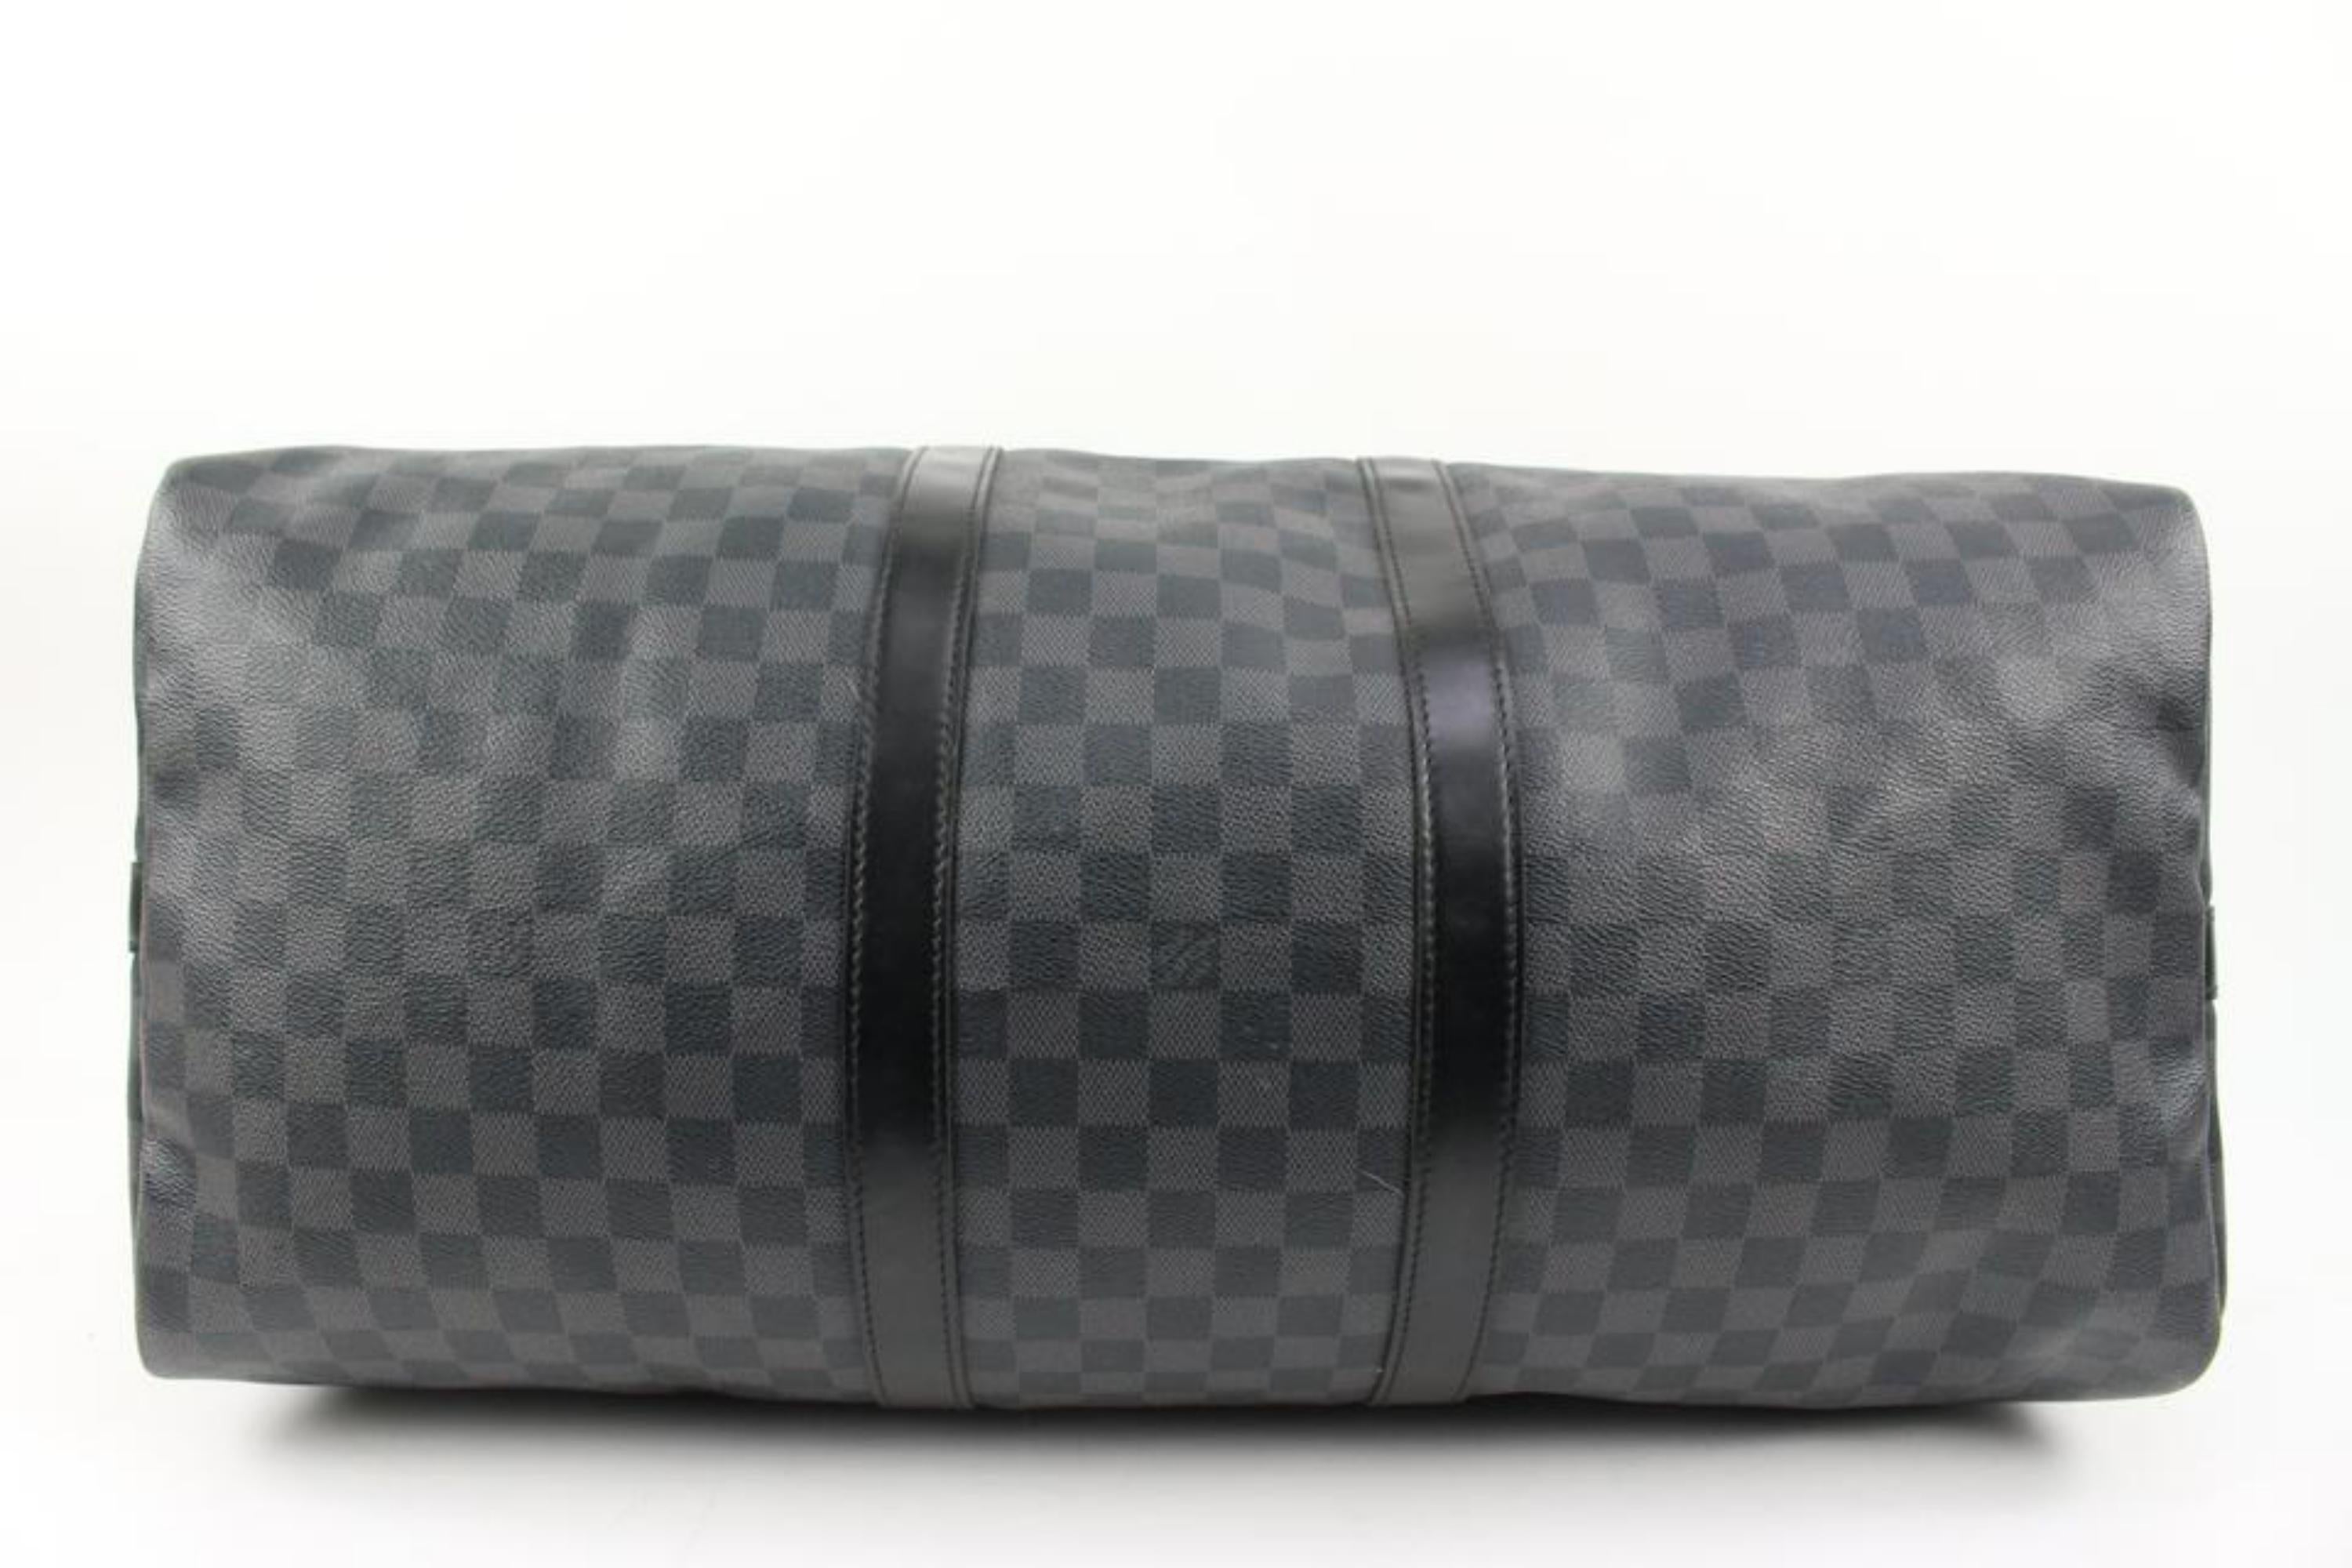 Louis Vuitton Damier Graphite Keepall Bandouliere 55 Duffle with Strap 97lv221s 4